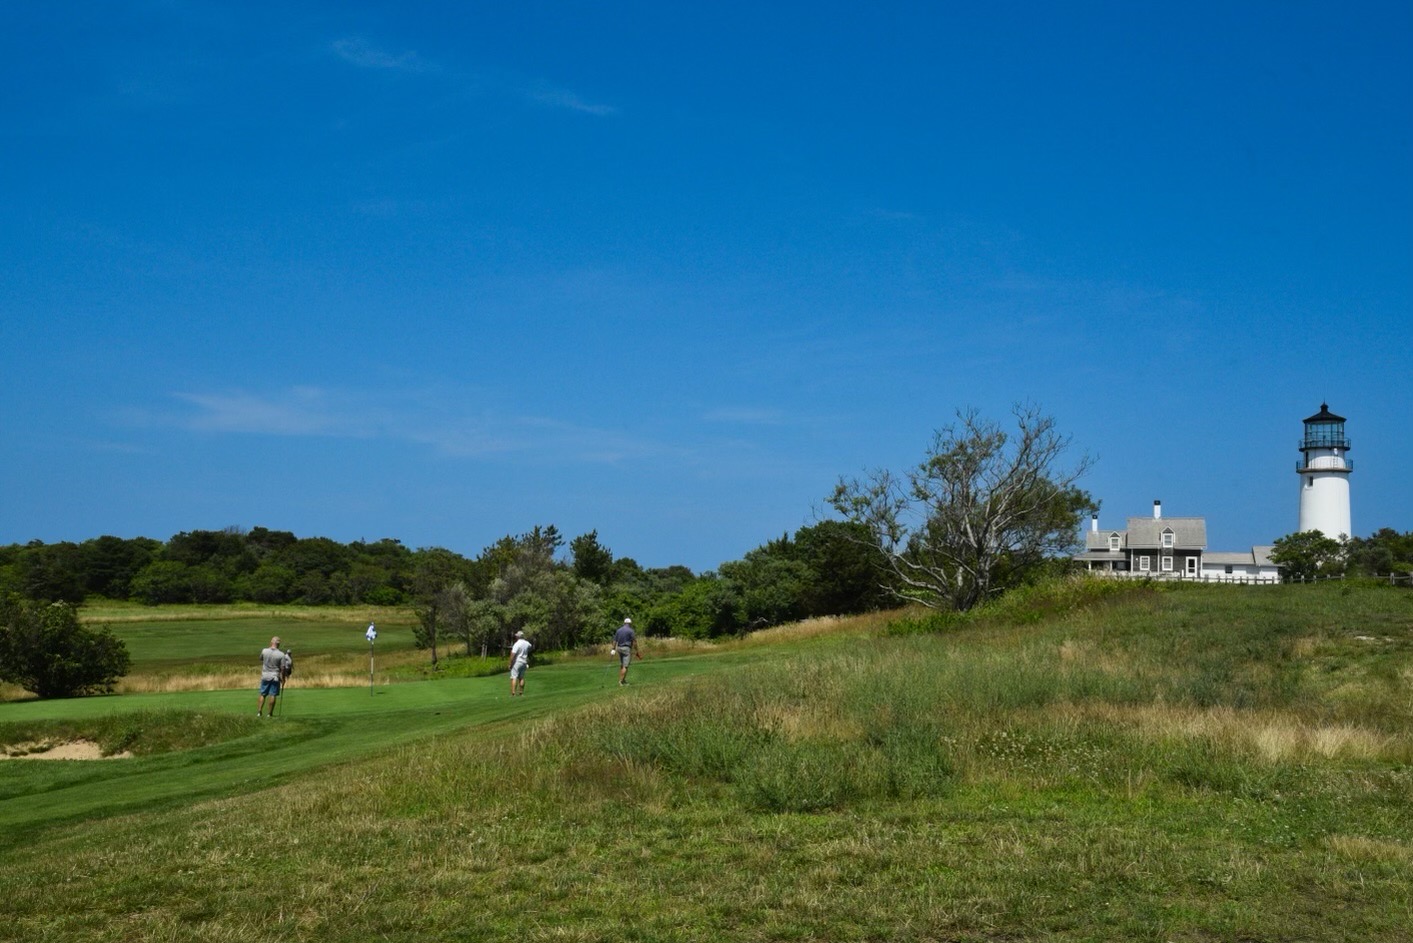 A group of golfers amongst green grass with a white lighthouse in the background.